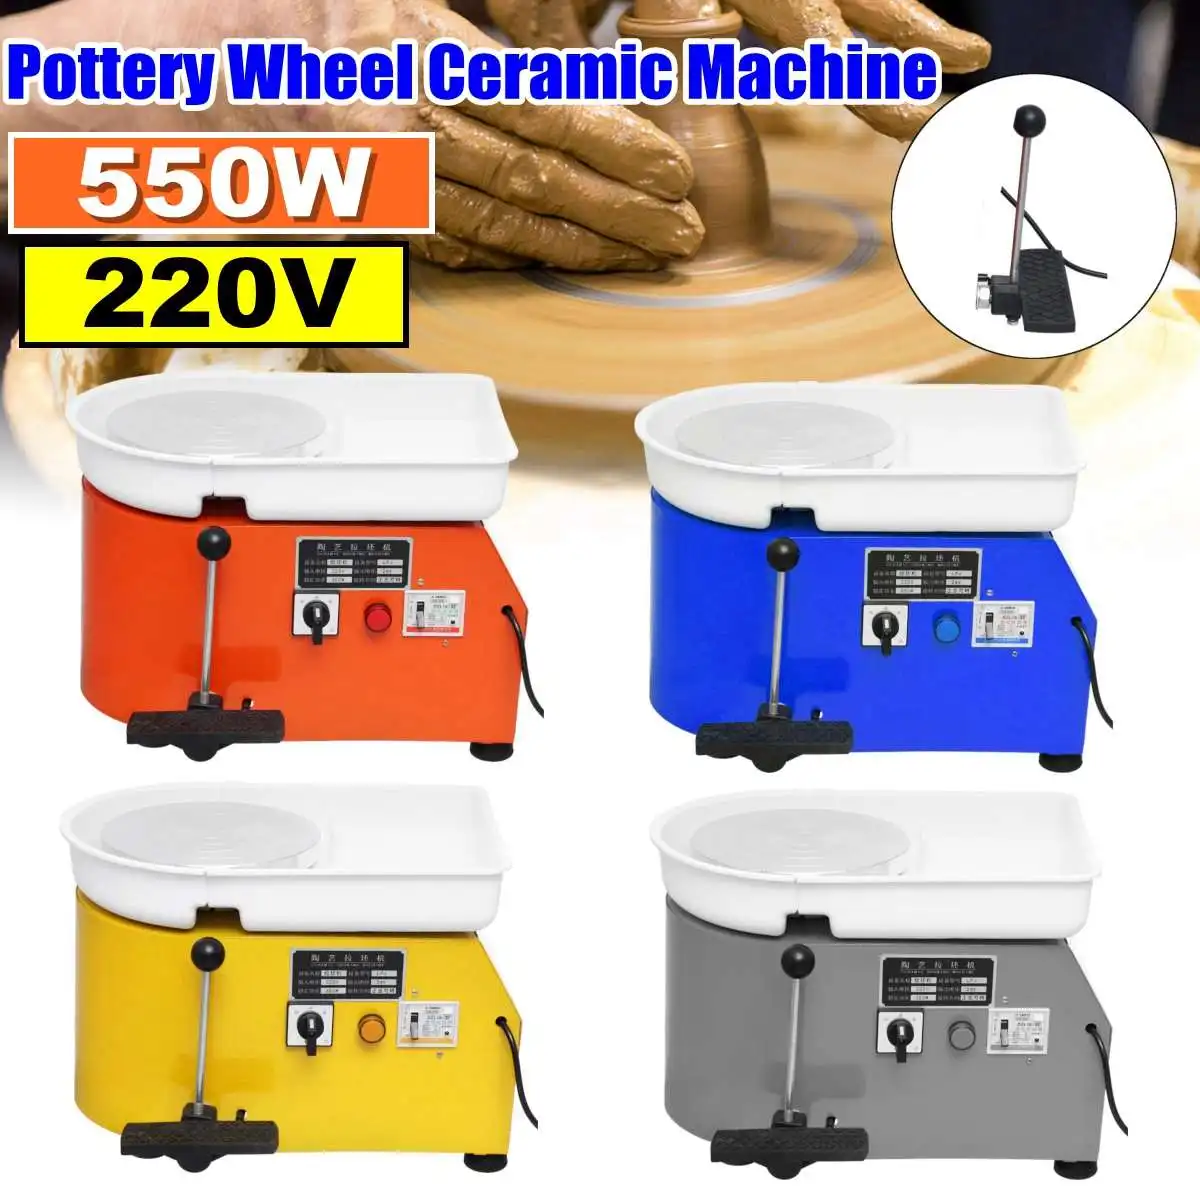 Pottery Wheel Machine 25cm AC 220V 550W Flexible Manual pedal Ceramic Work Ceramics Clay Art With Mobile Smooth Low Noise